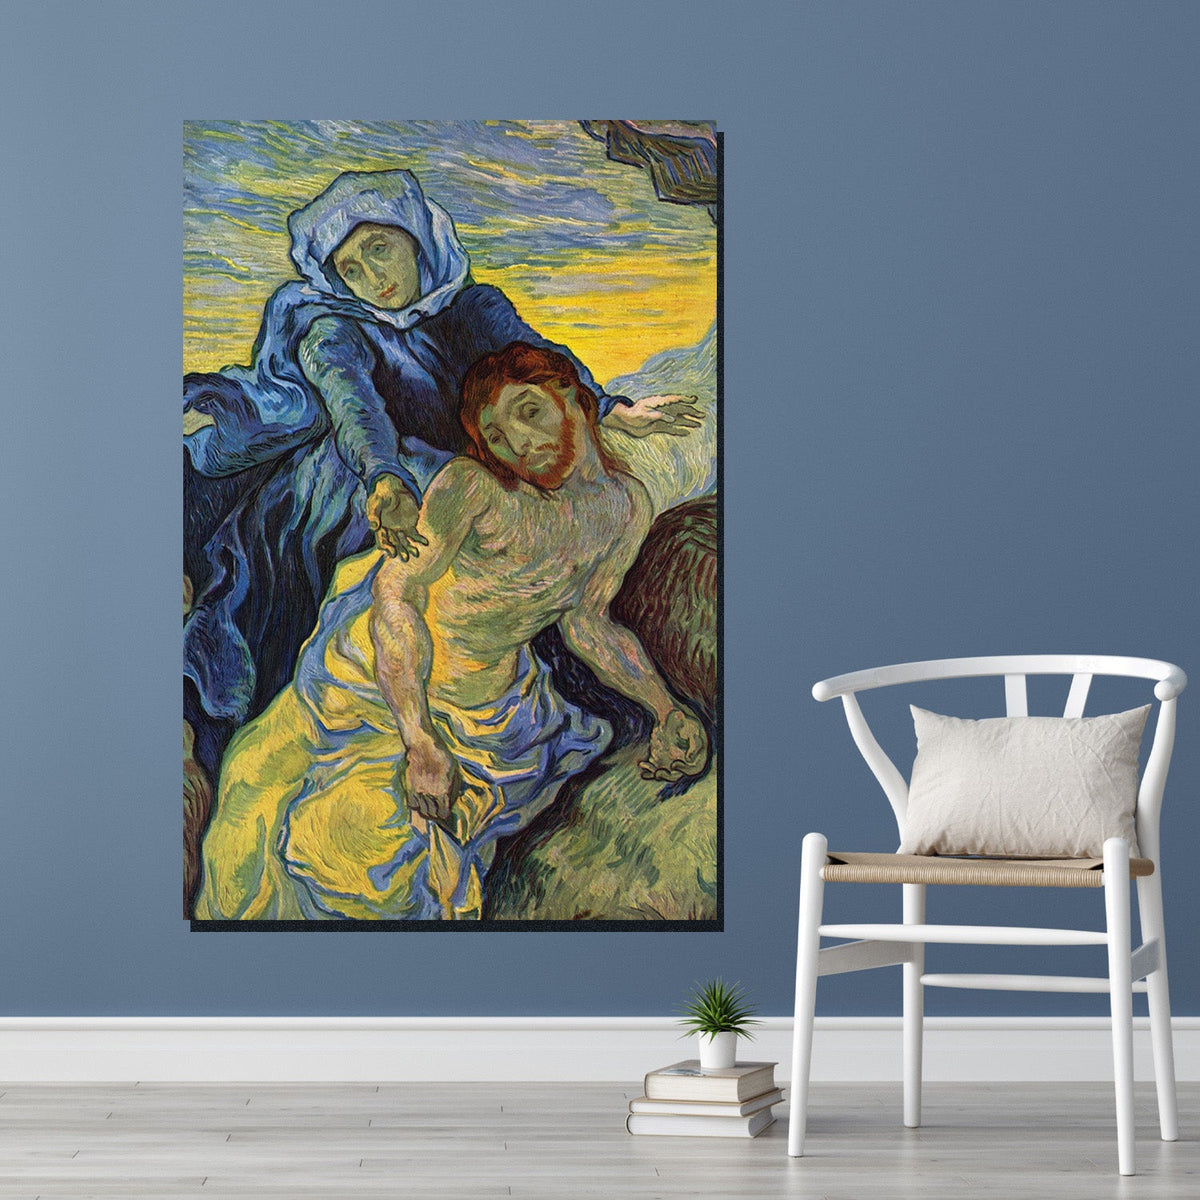 https://cdn.shopify.com/s/files/1/0387/9986/8044/products/ThePietabyVanGoghCanvasArtPrintStretched-3.jpg